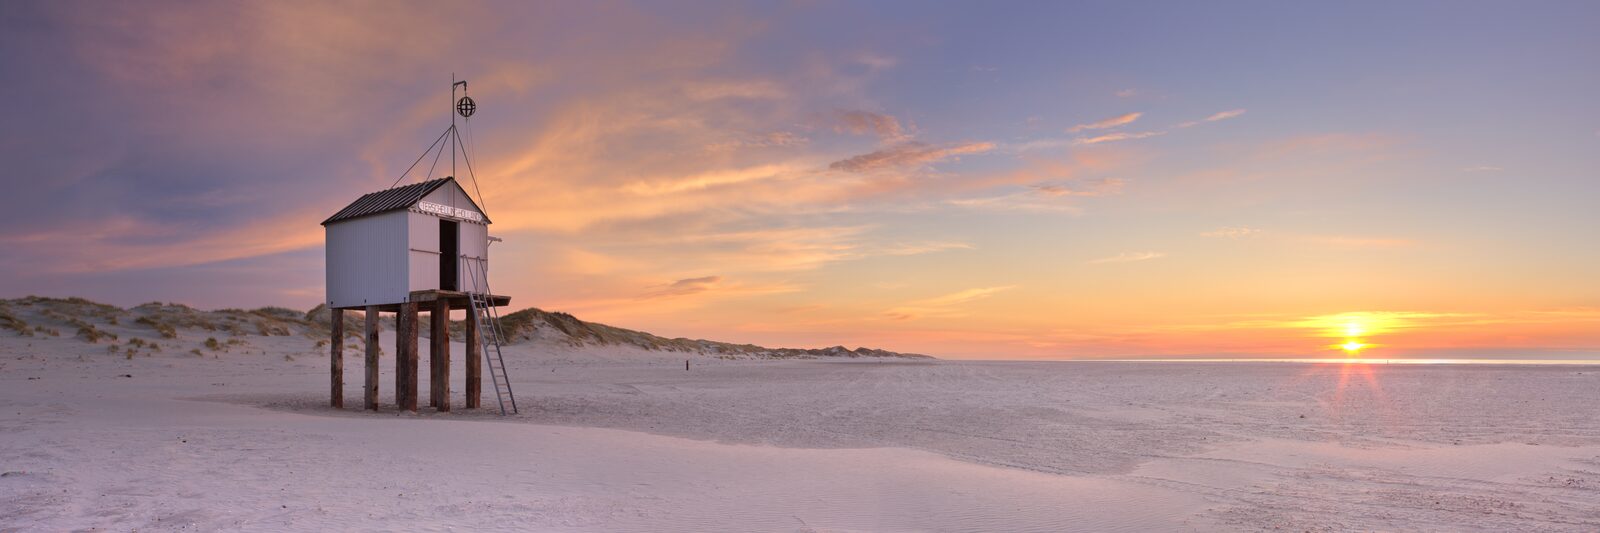 Do you want to experience the true island feeling? Come visit Terschelling!